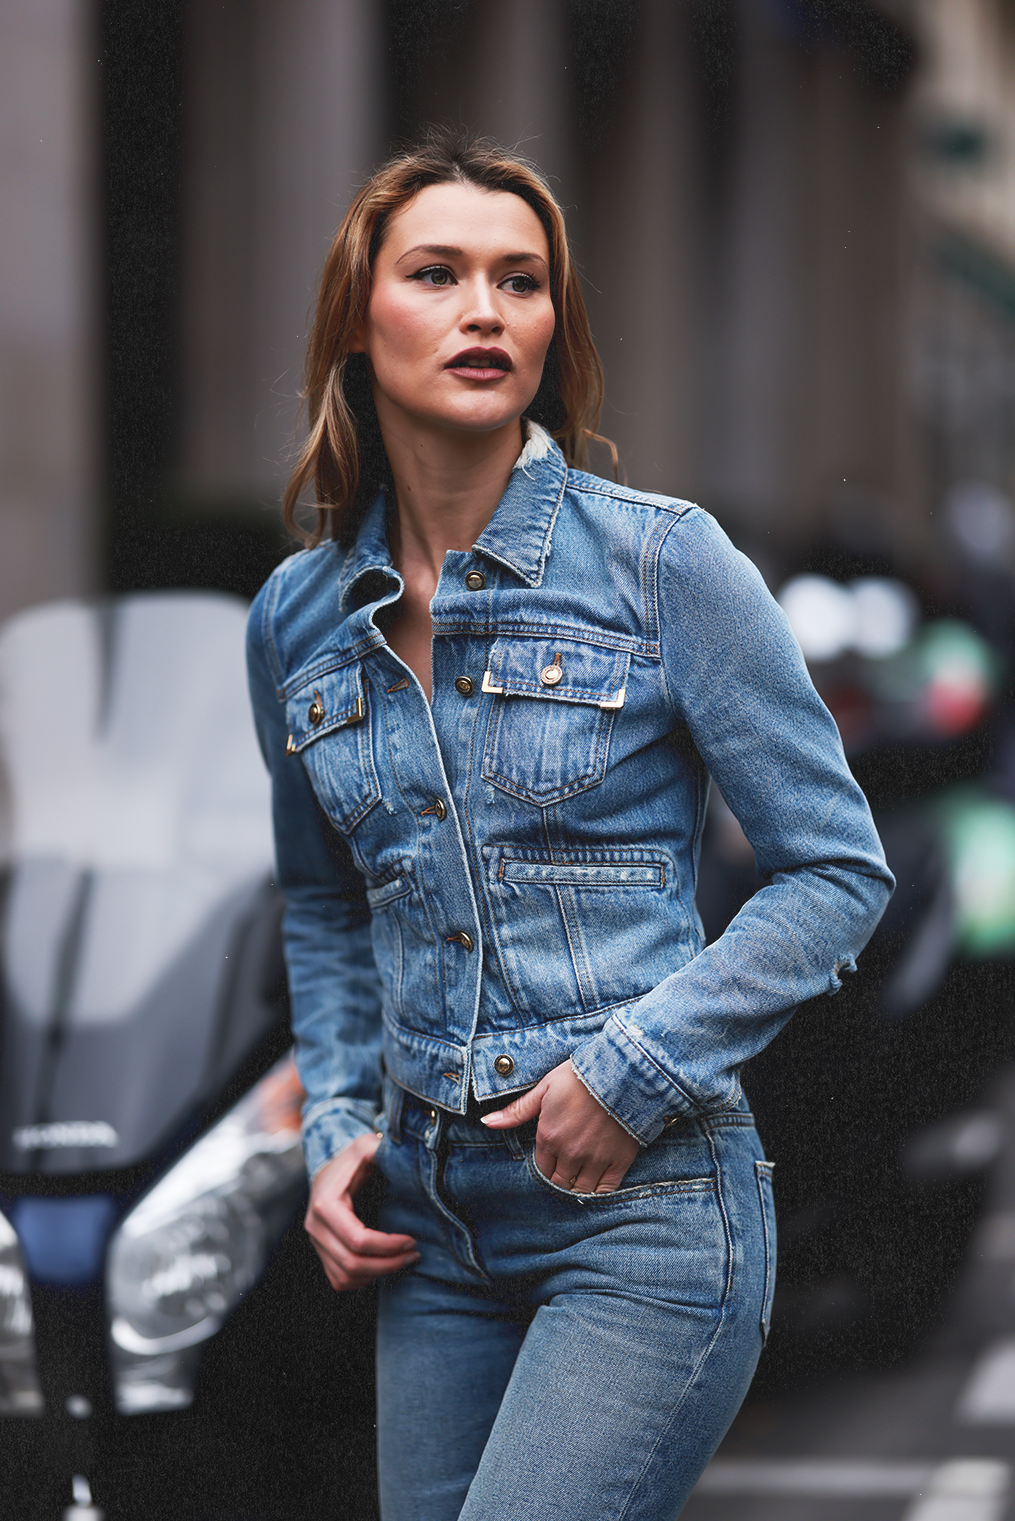 Jean Jackets for Women Denim Jackets to Wear This Fall